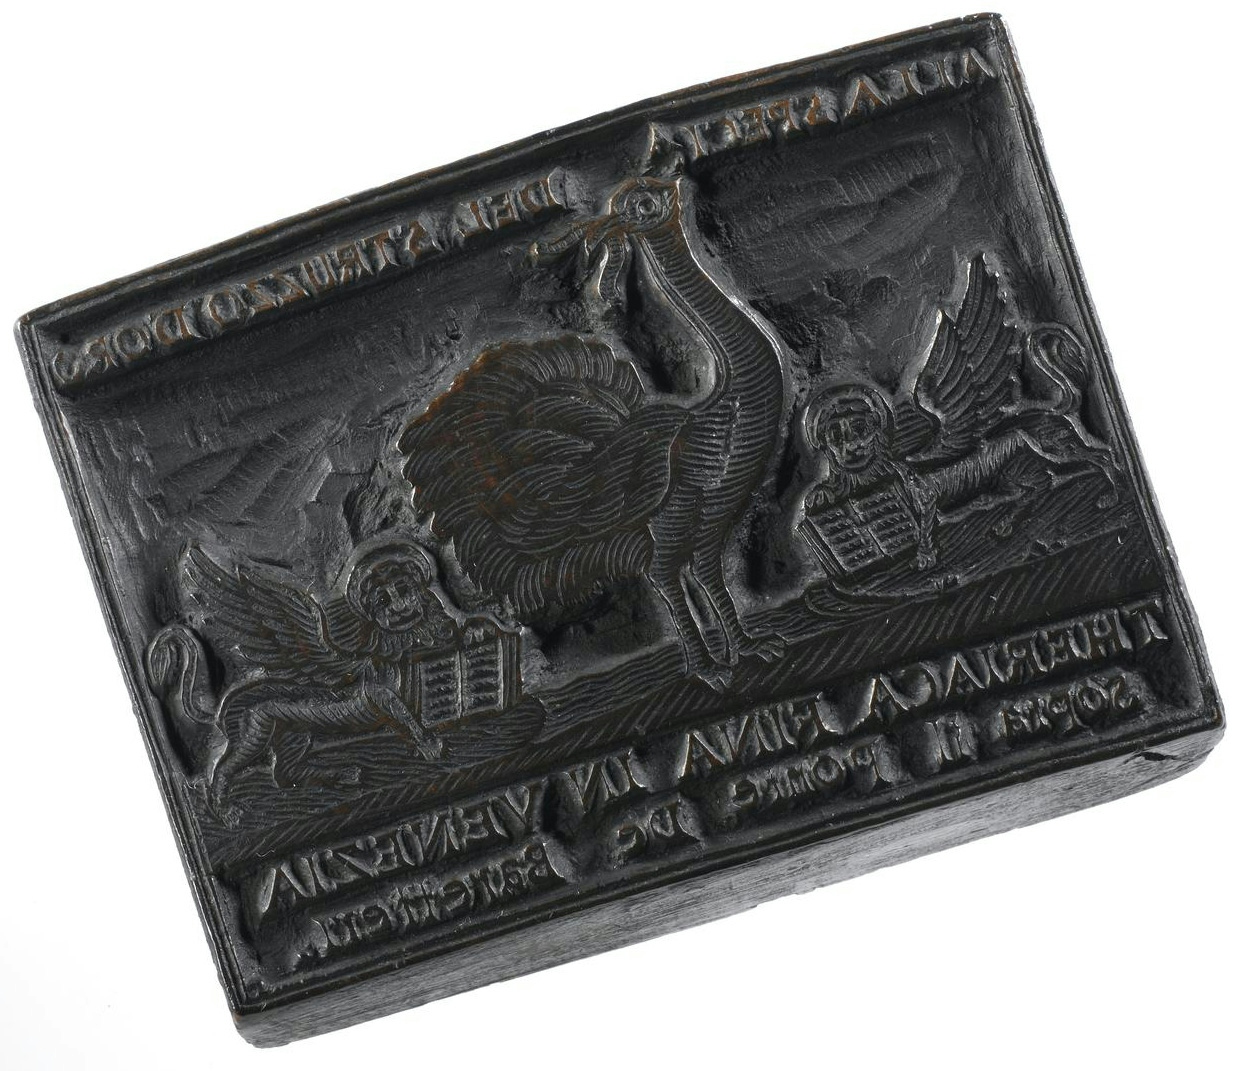 Wooden stamp with ostrich for theriac labels